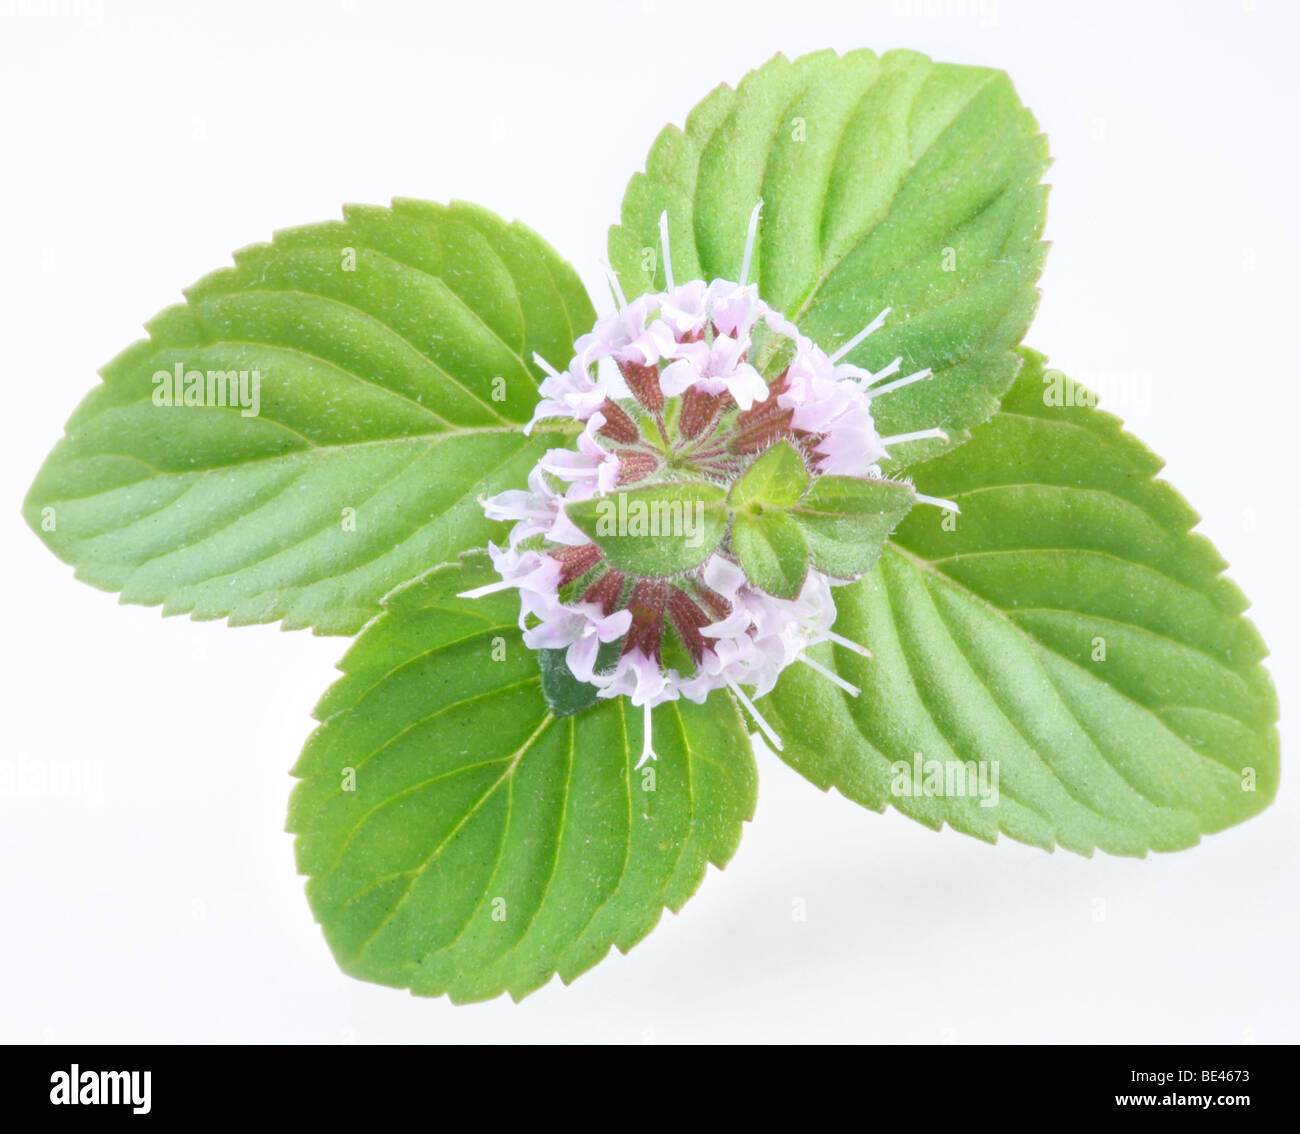 Mint on a white background Stock Photo